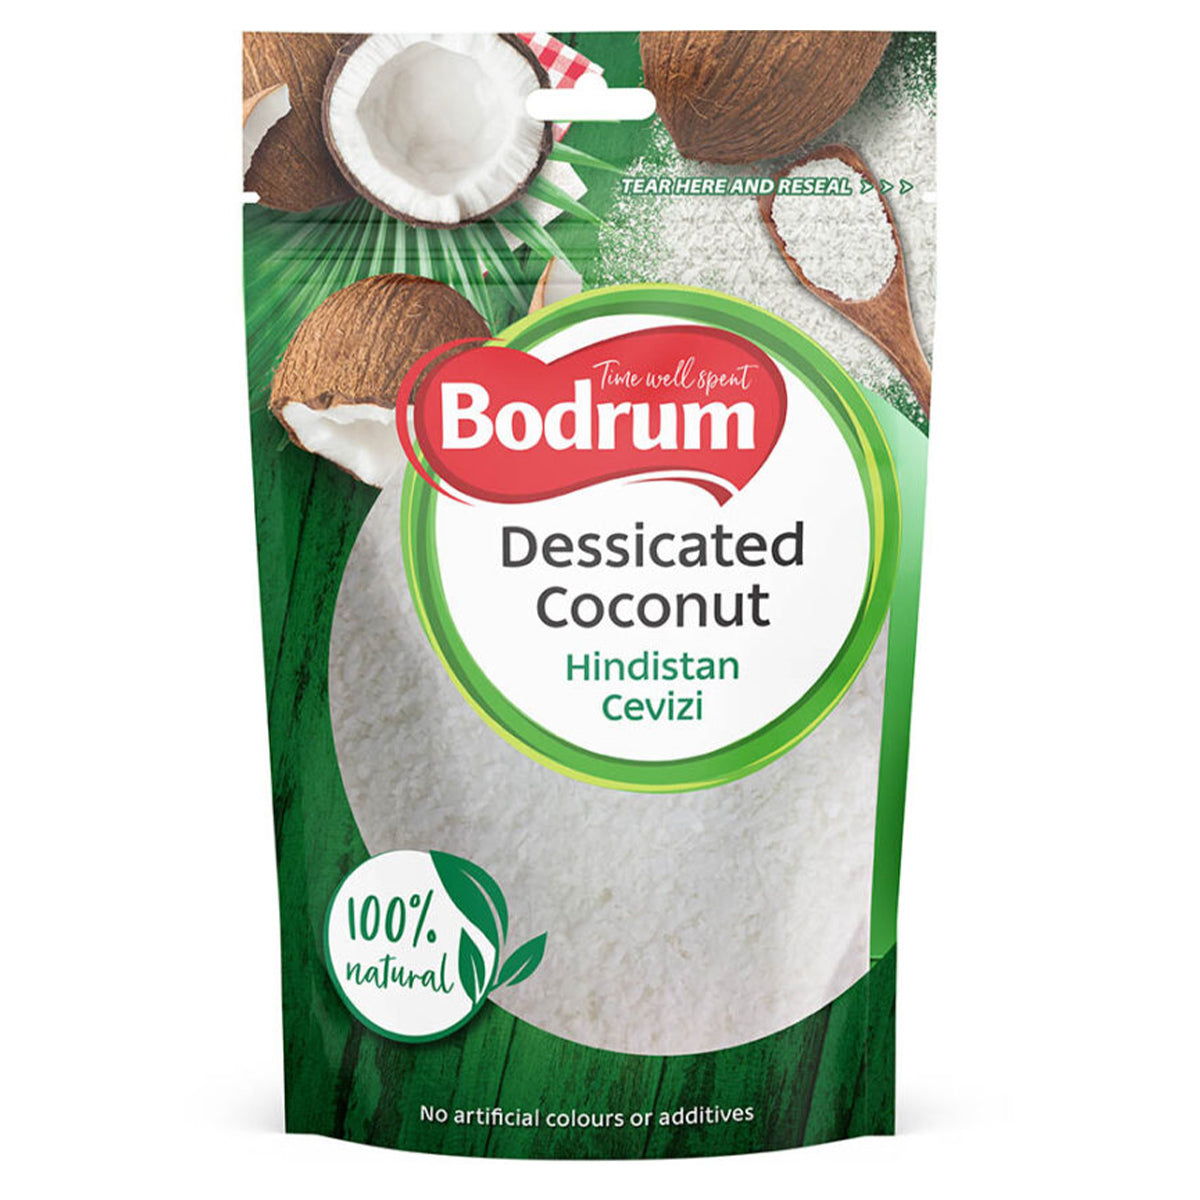 Bodrum Dessicated Coconuts powder by Bodrum - 75g.